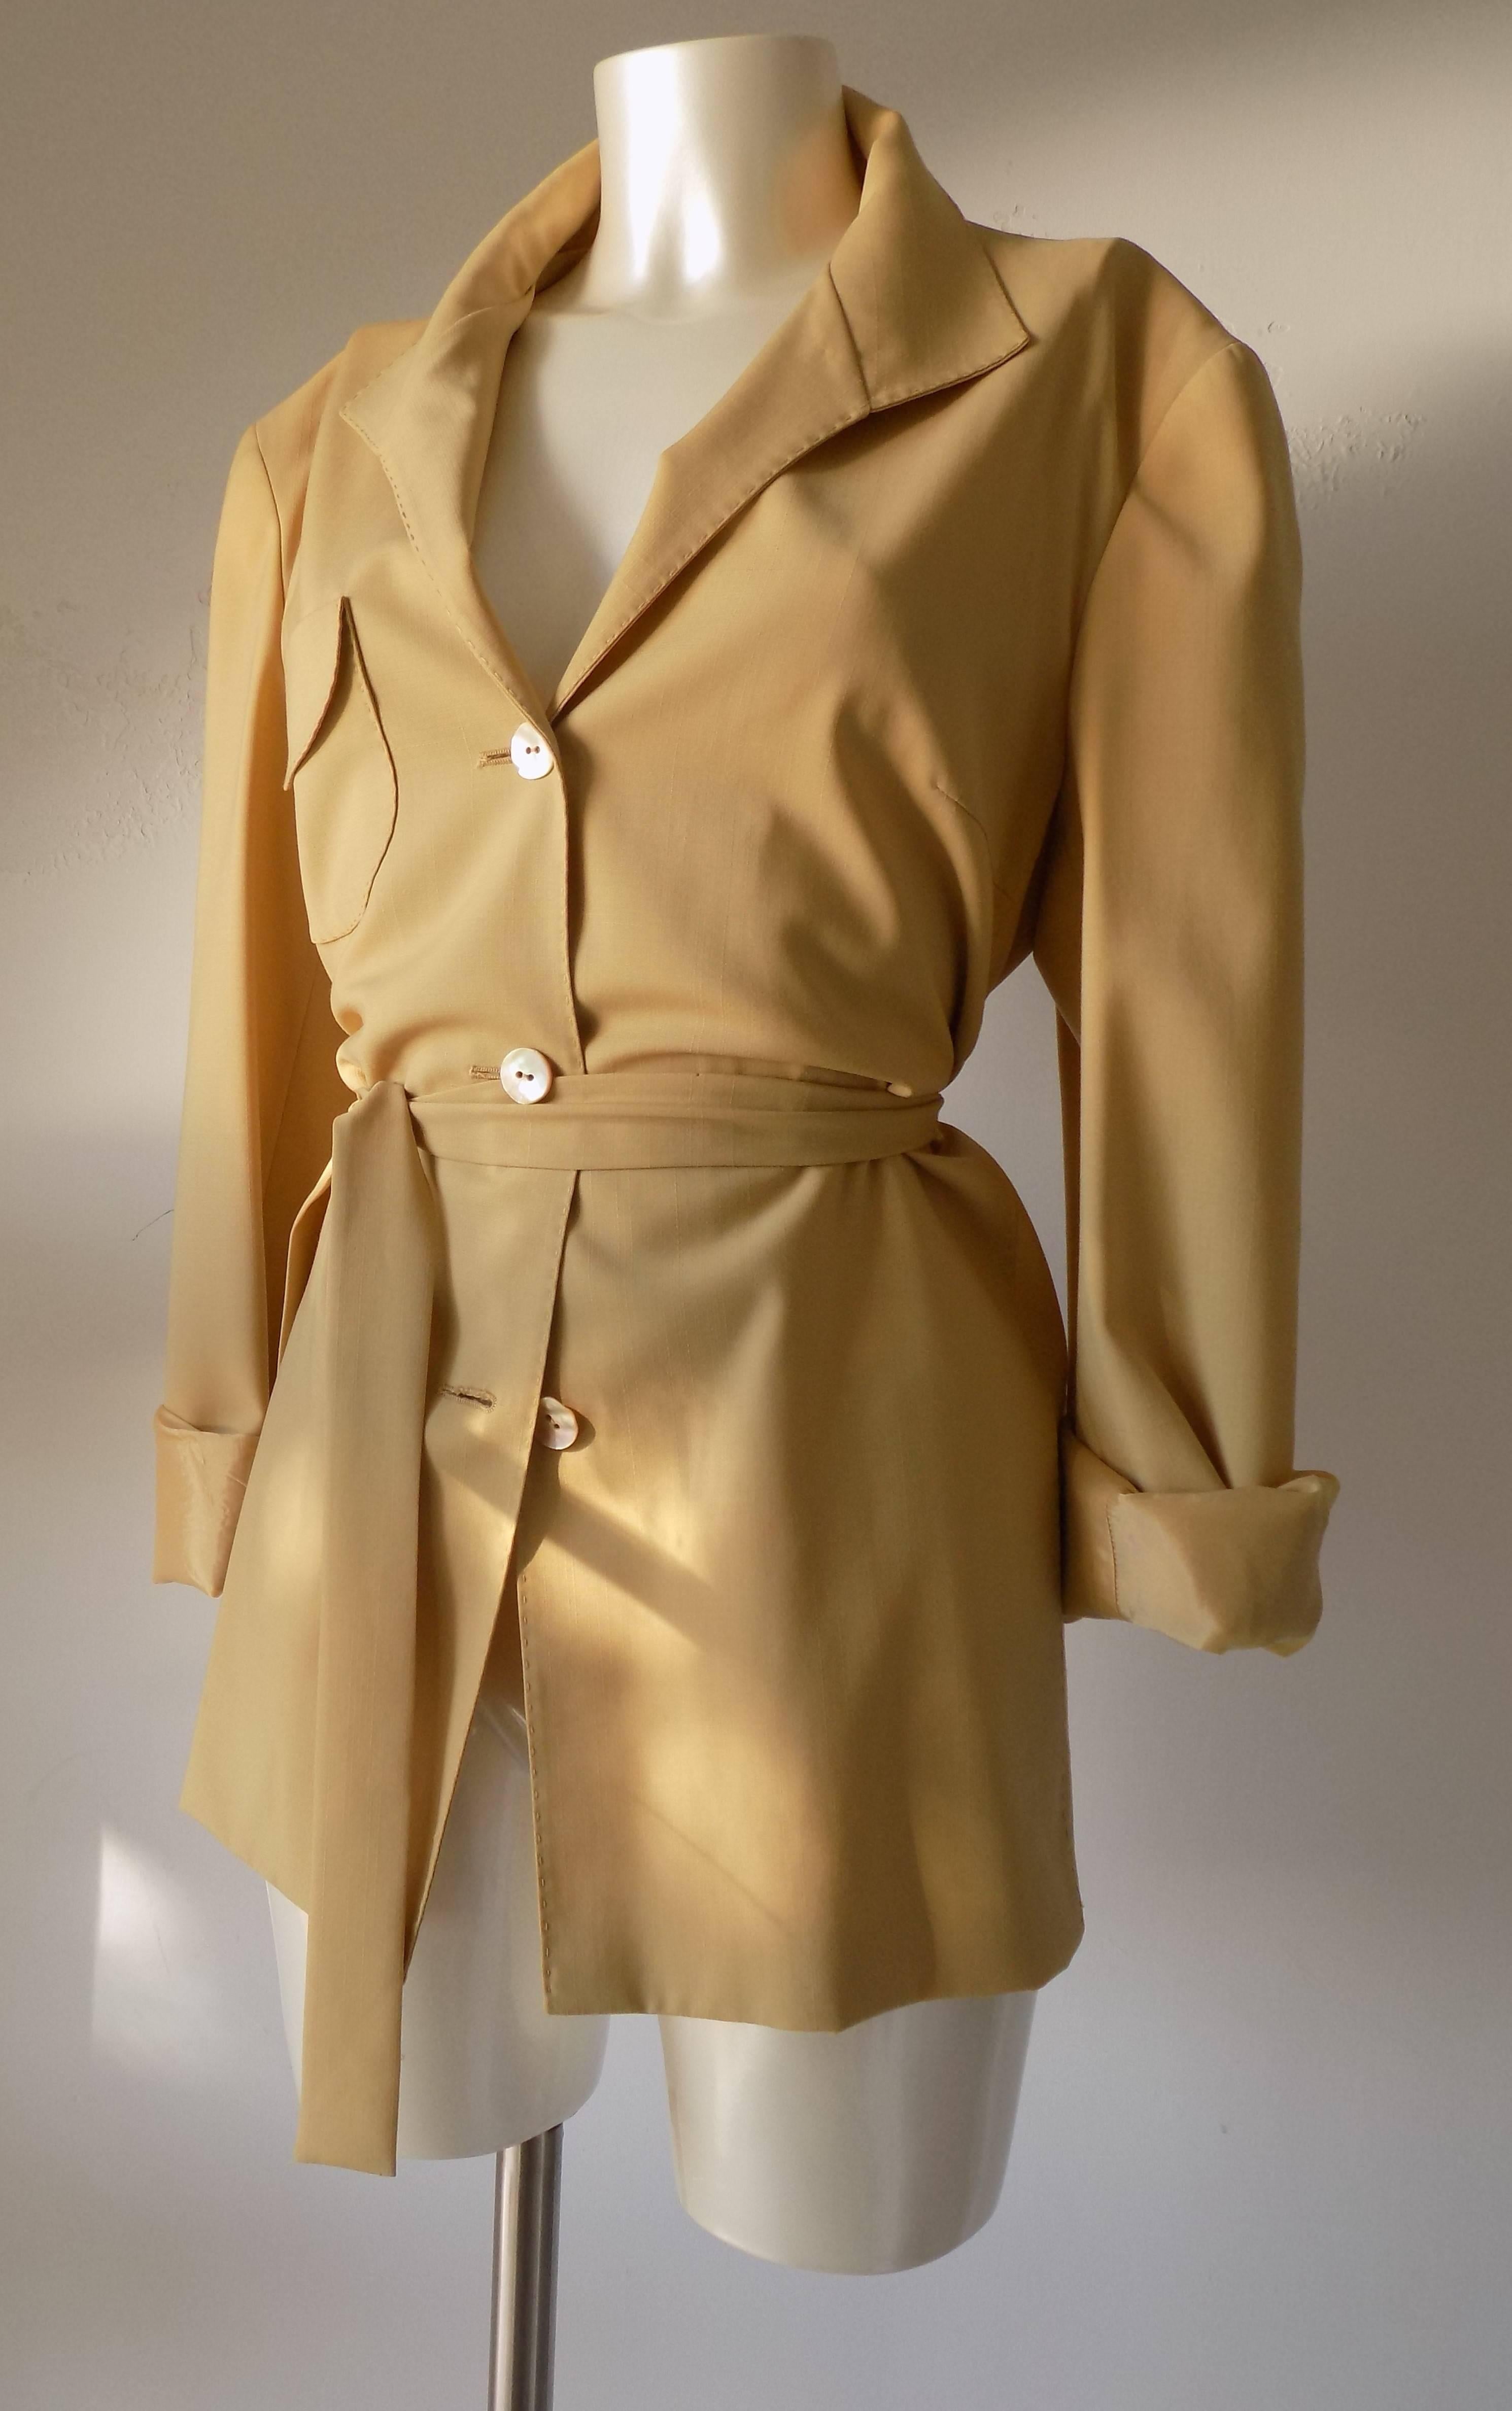 1980s Genny by Gianni Versace light brown wool jacket in italian size range 48
totally made in italy
100 wool